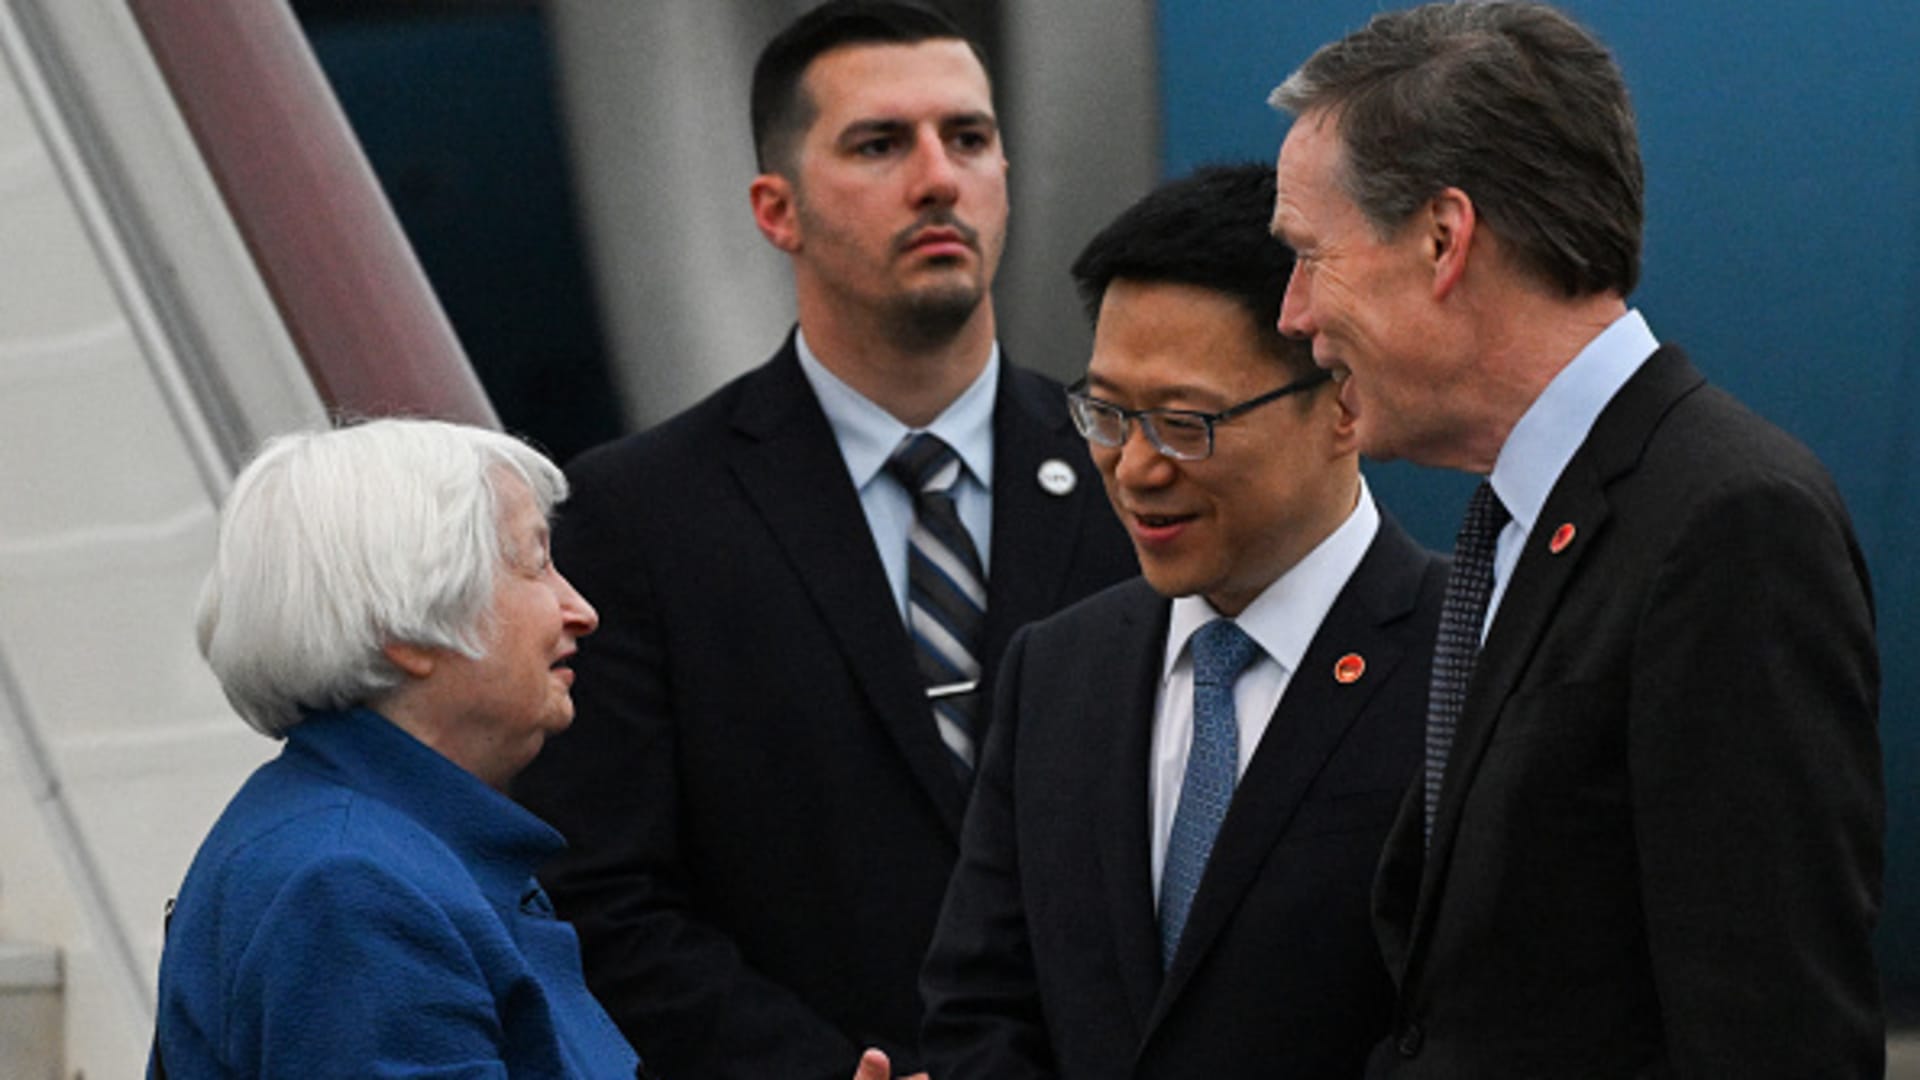 Yellen kicks off China conferences with overcapacity issues, encouraging market-oriented reforms